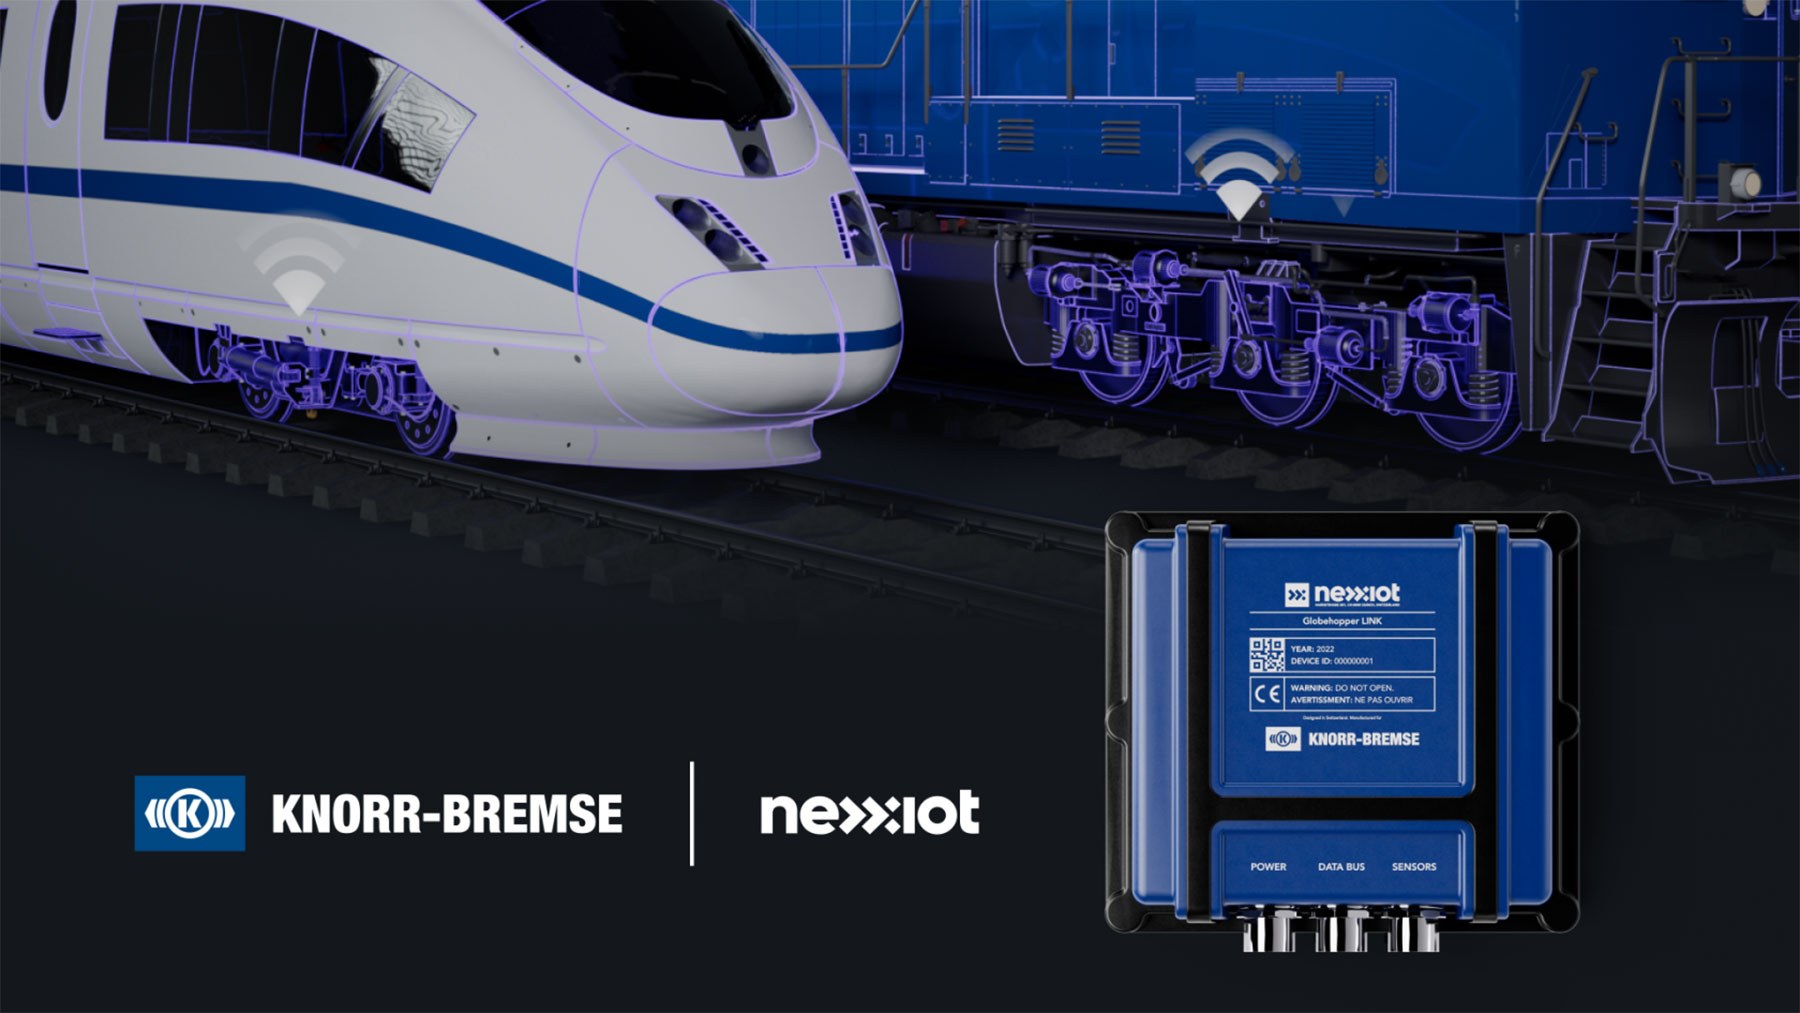 Knorr-Bremse Concludes Strategic Cooperation And Investment Agreement With Nexxiot To Boost Digital Business Models For The Rail Industry